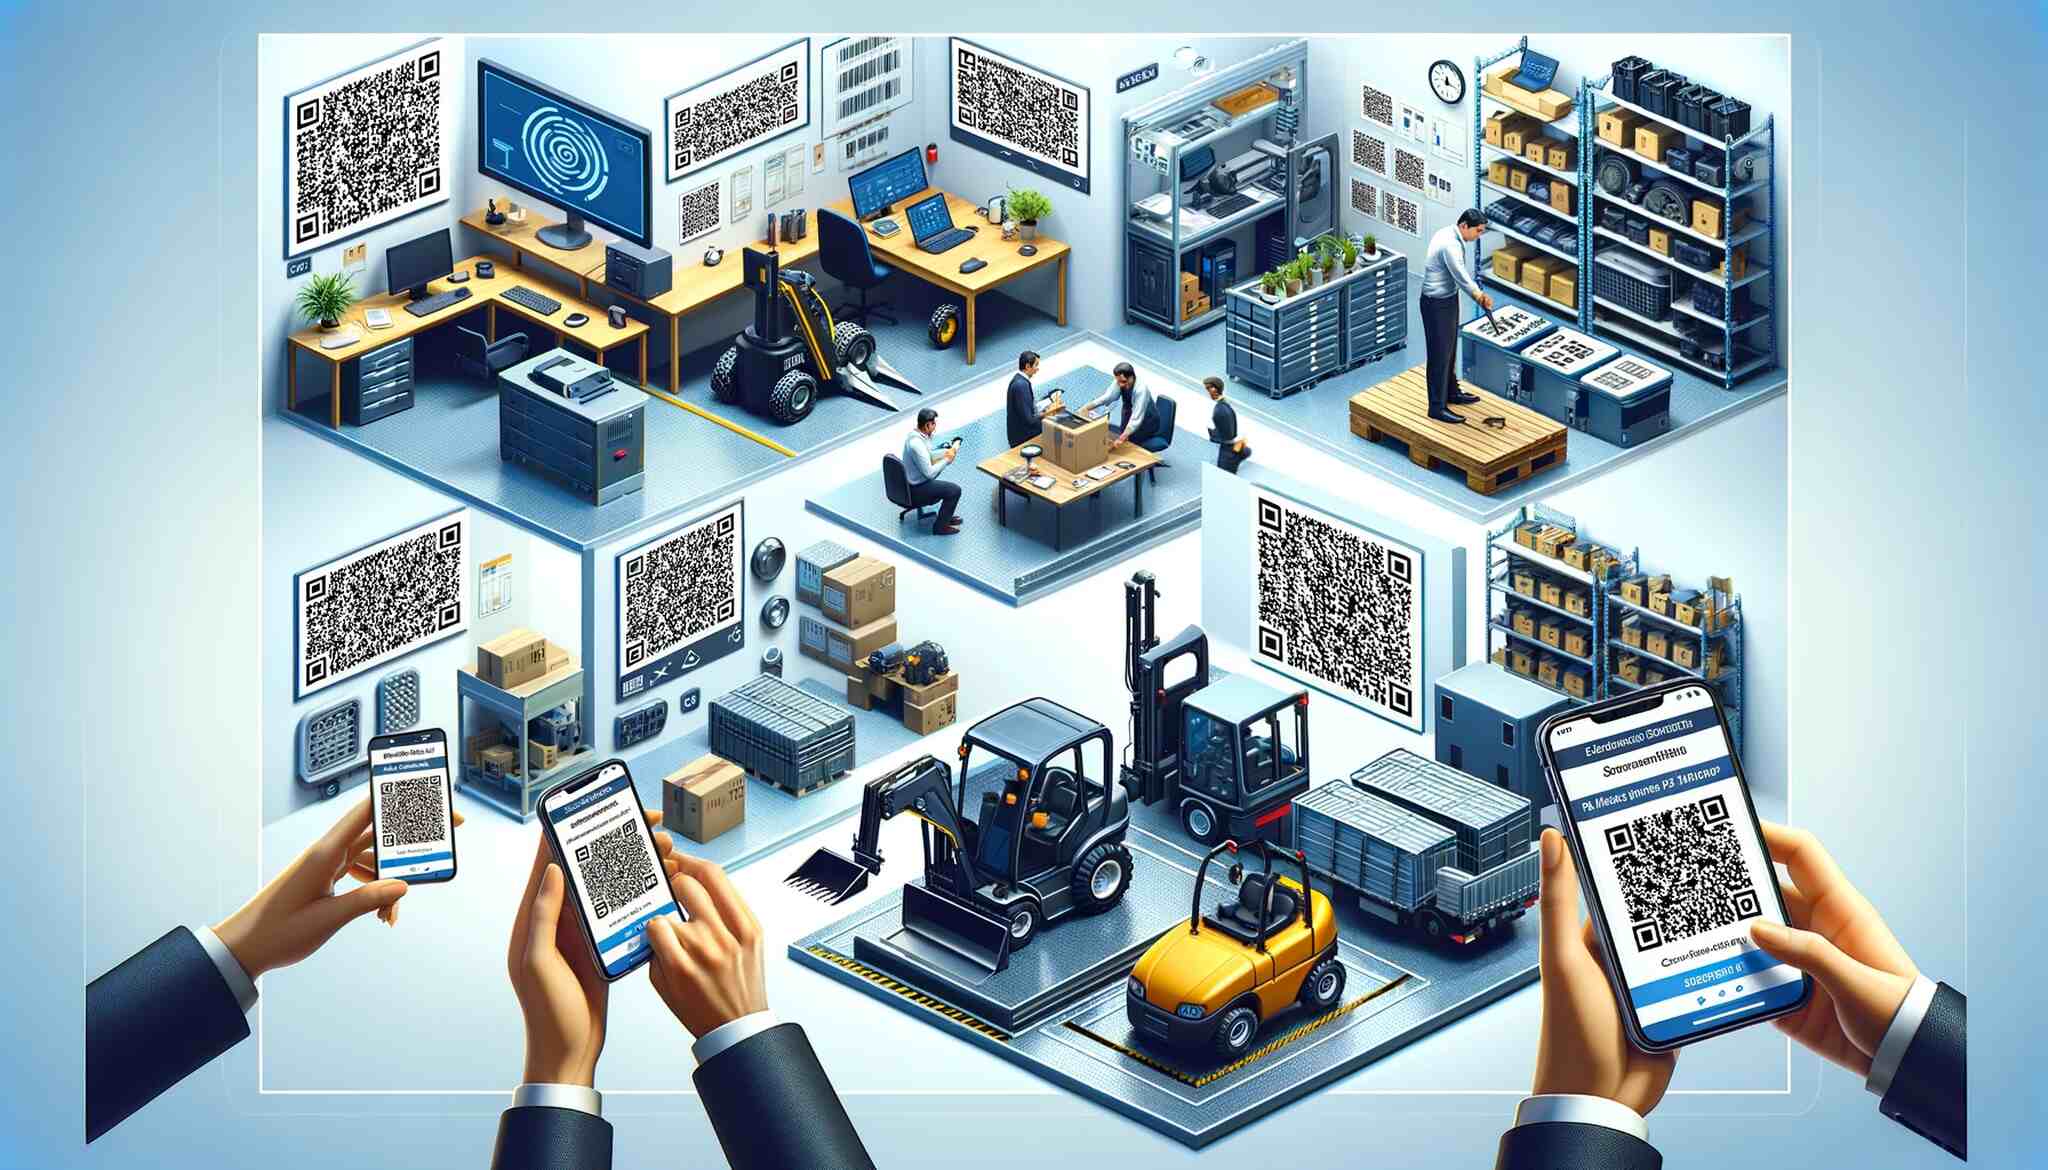 An illustration showing various assets in a workplace with QR codes